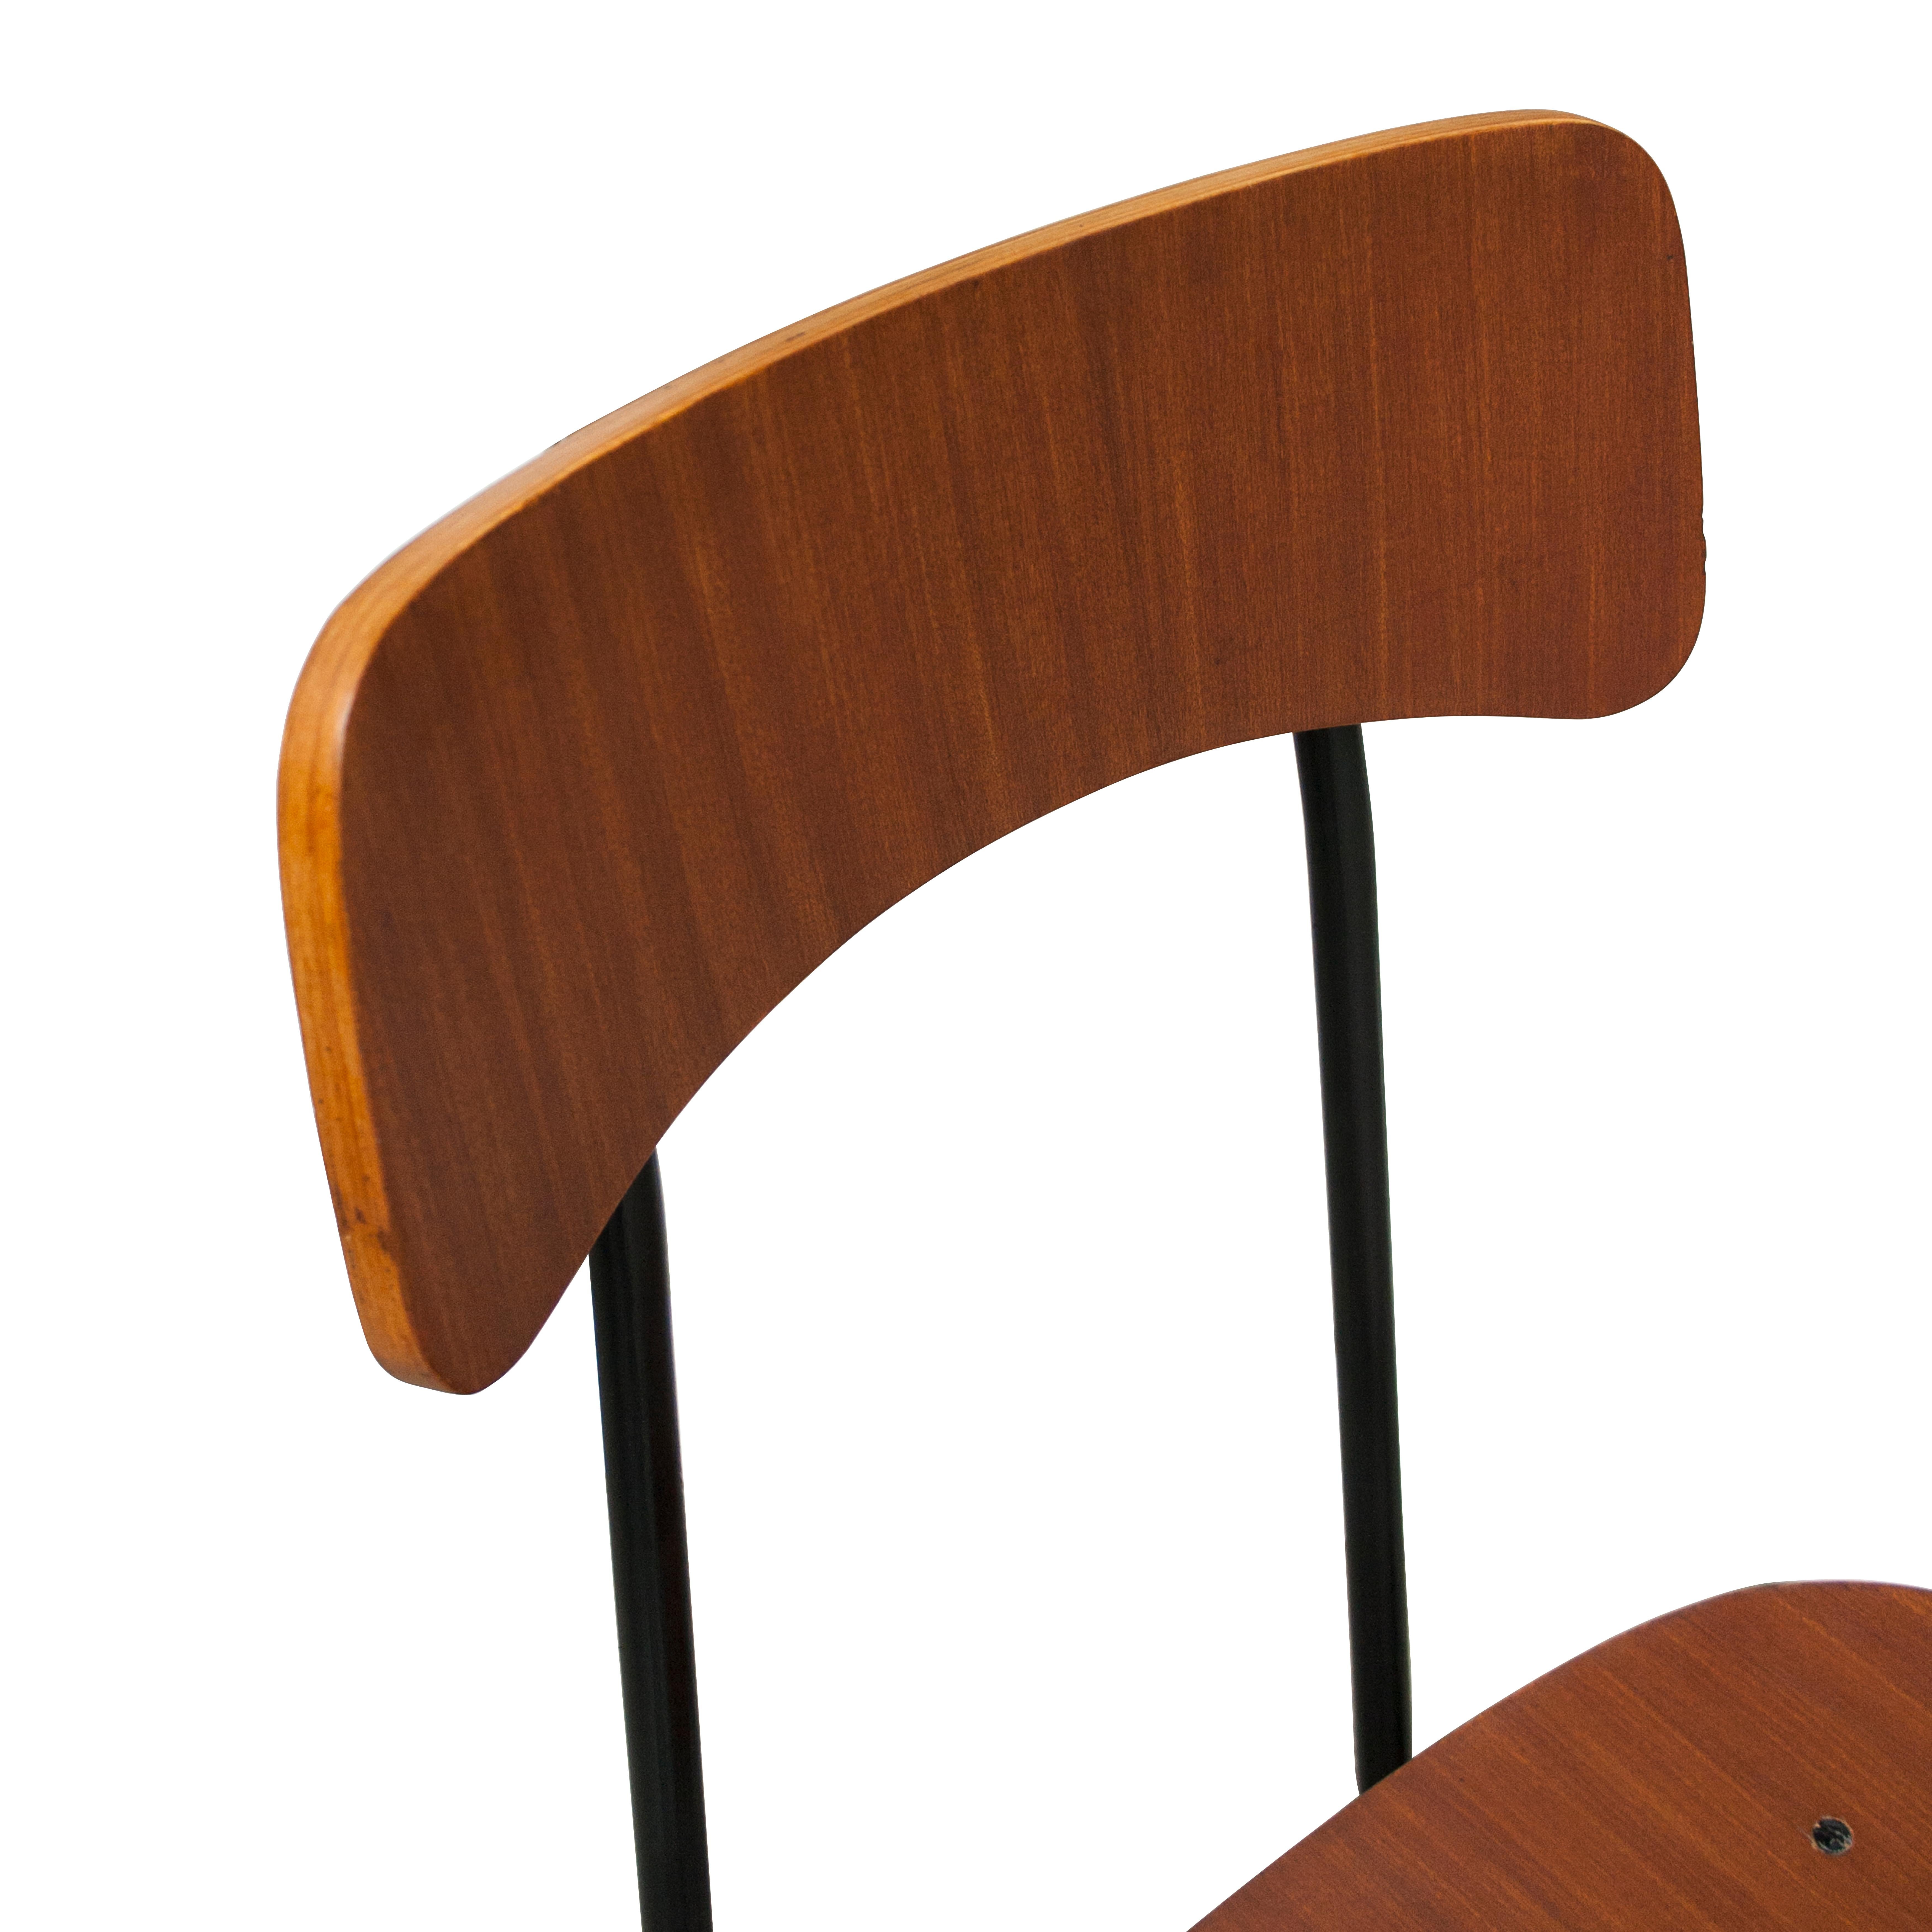 Mid-20th Century Mid-Century Modern Teak Wood Chair with Metalic Structure, Italy, 1950 For Sale